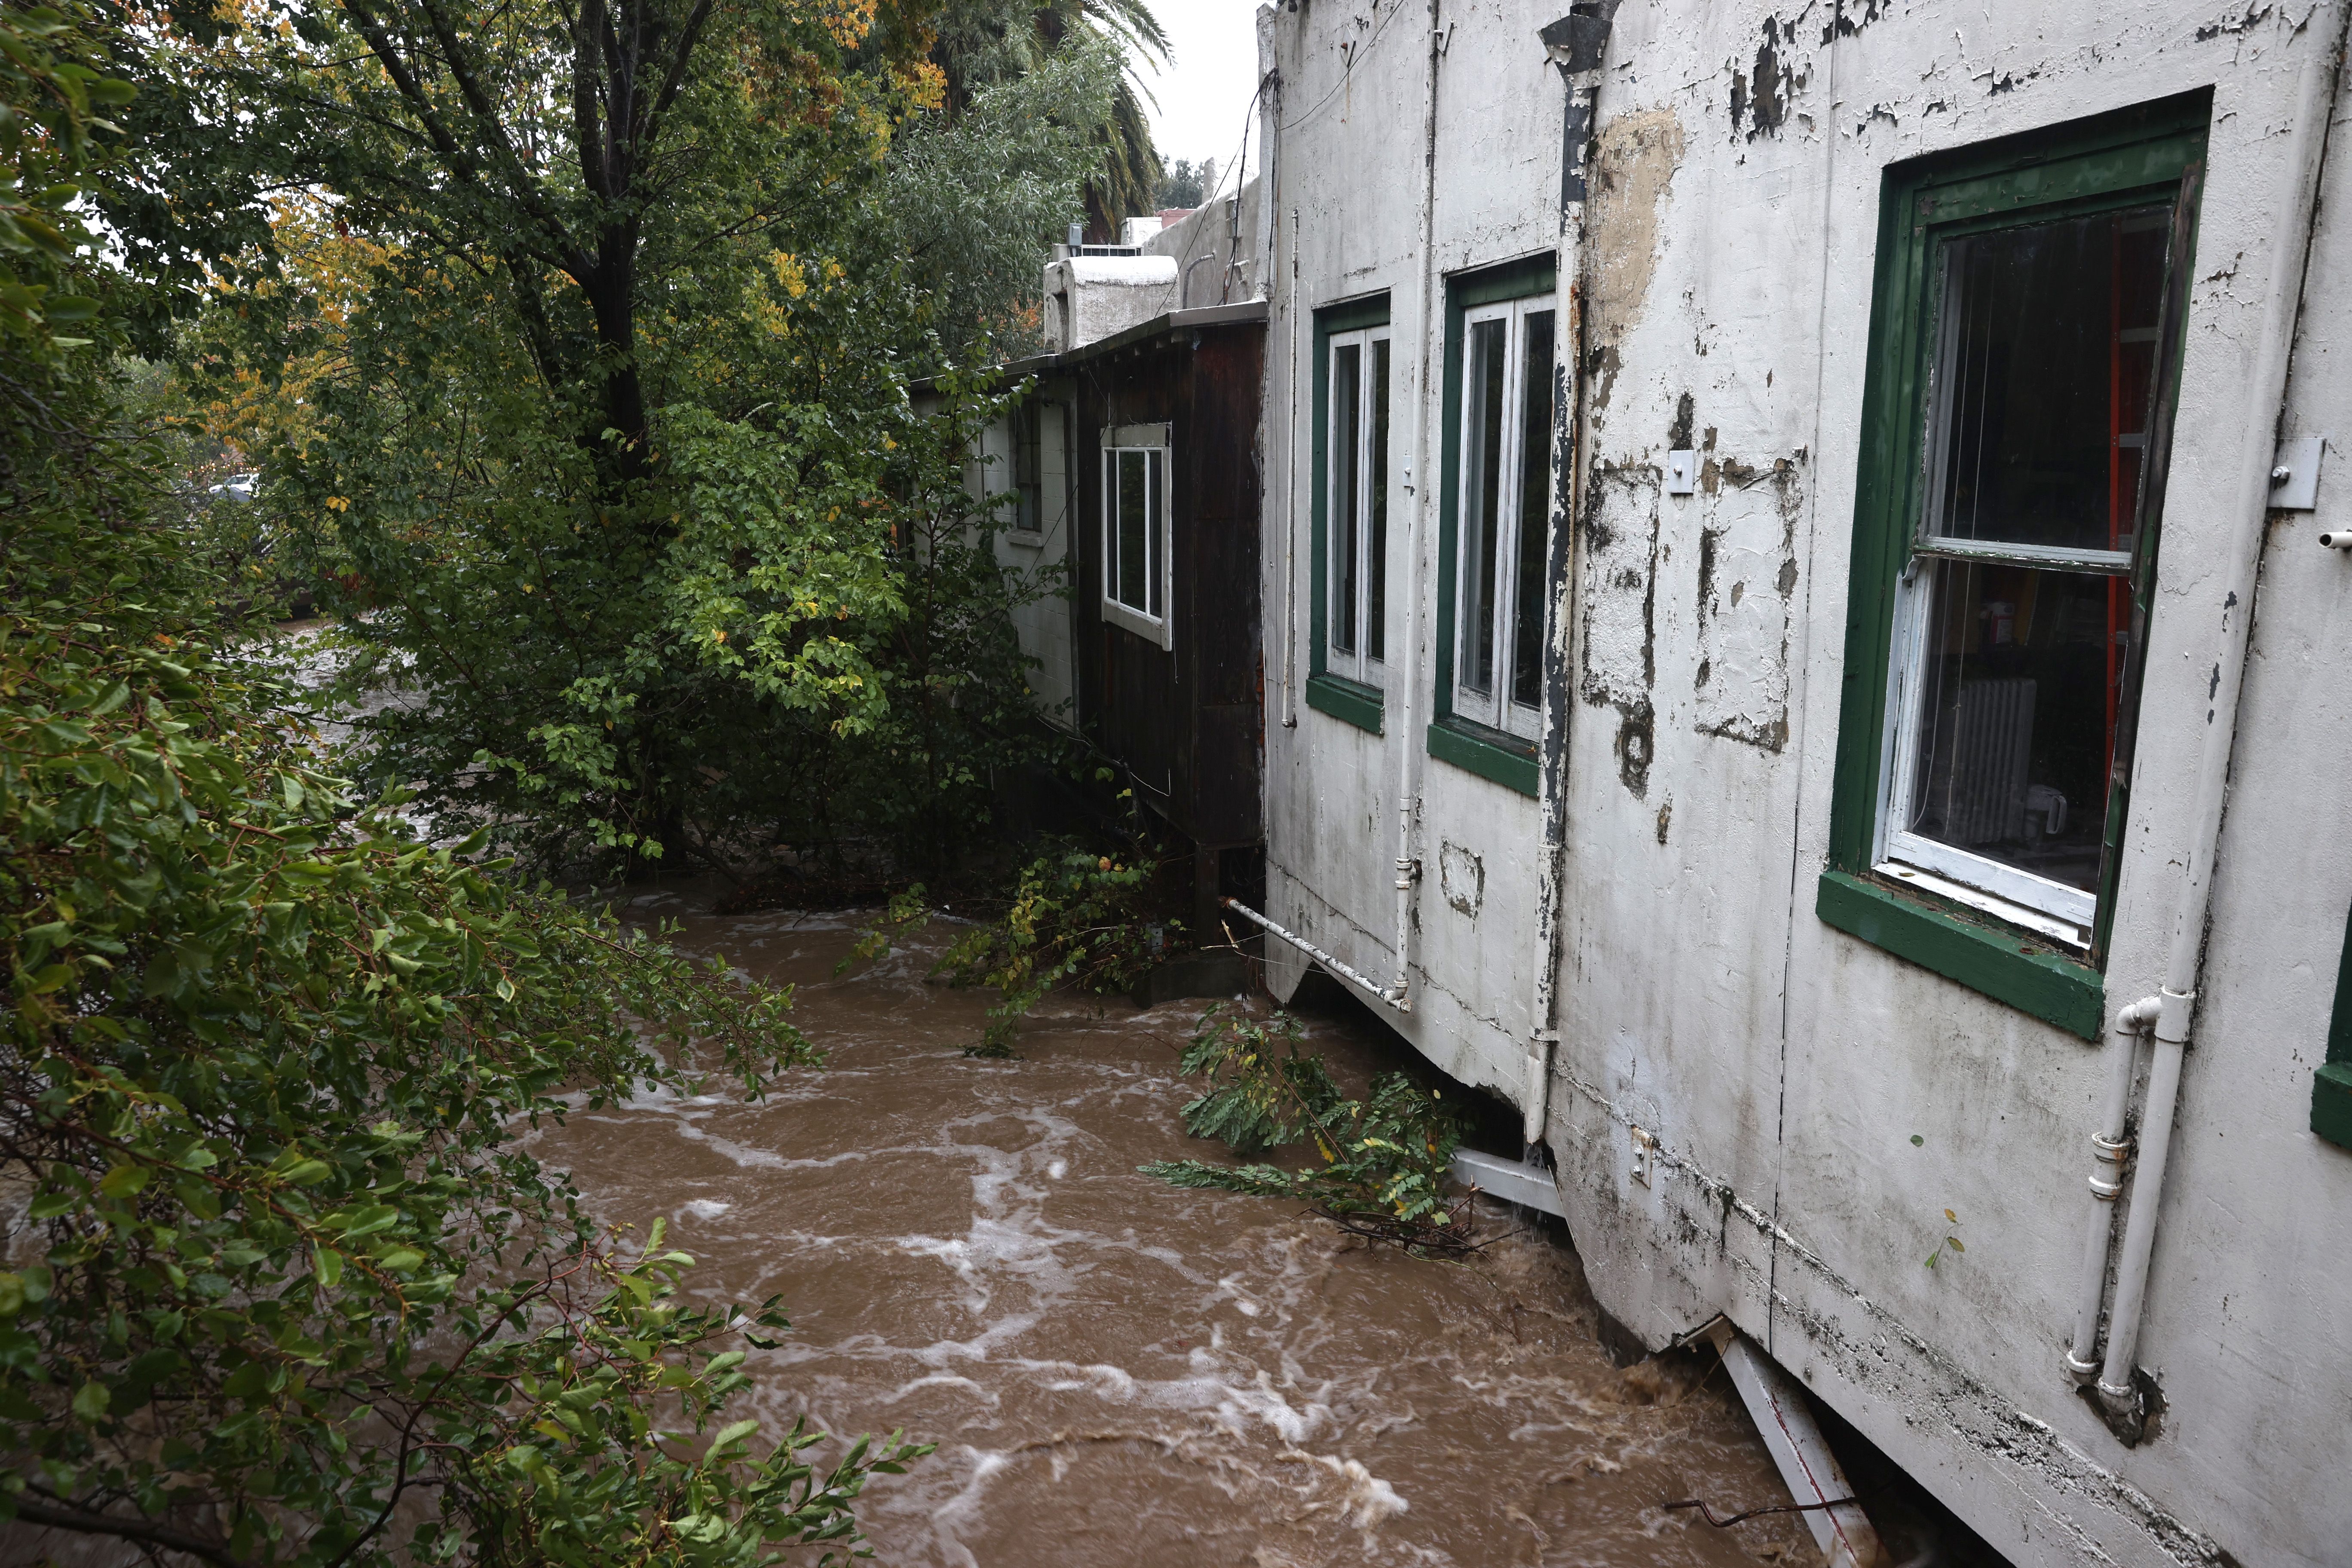  The swollen San Anselmo creek touches the bottom of businesses on October 24, 2021 in San Anselmo, California. 